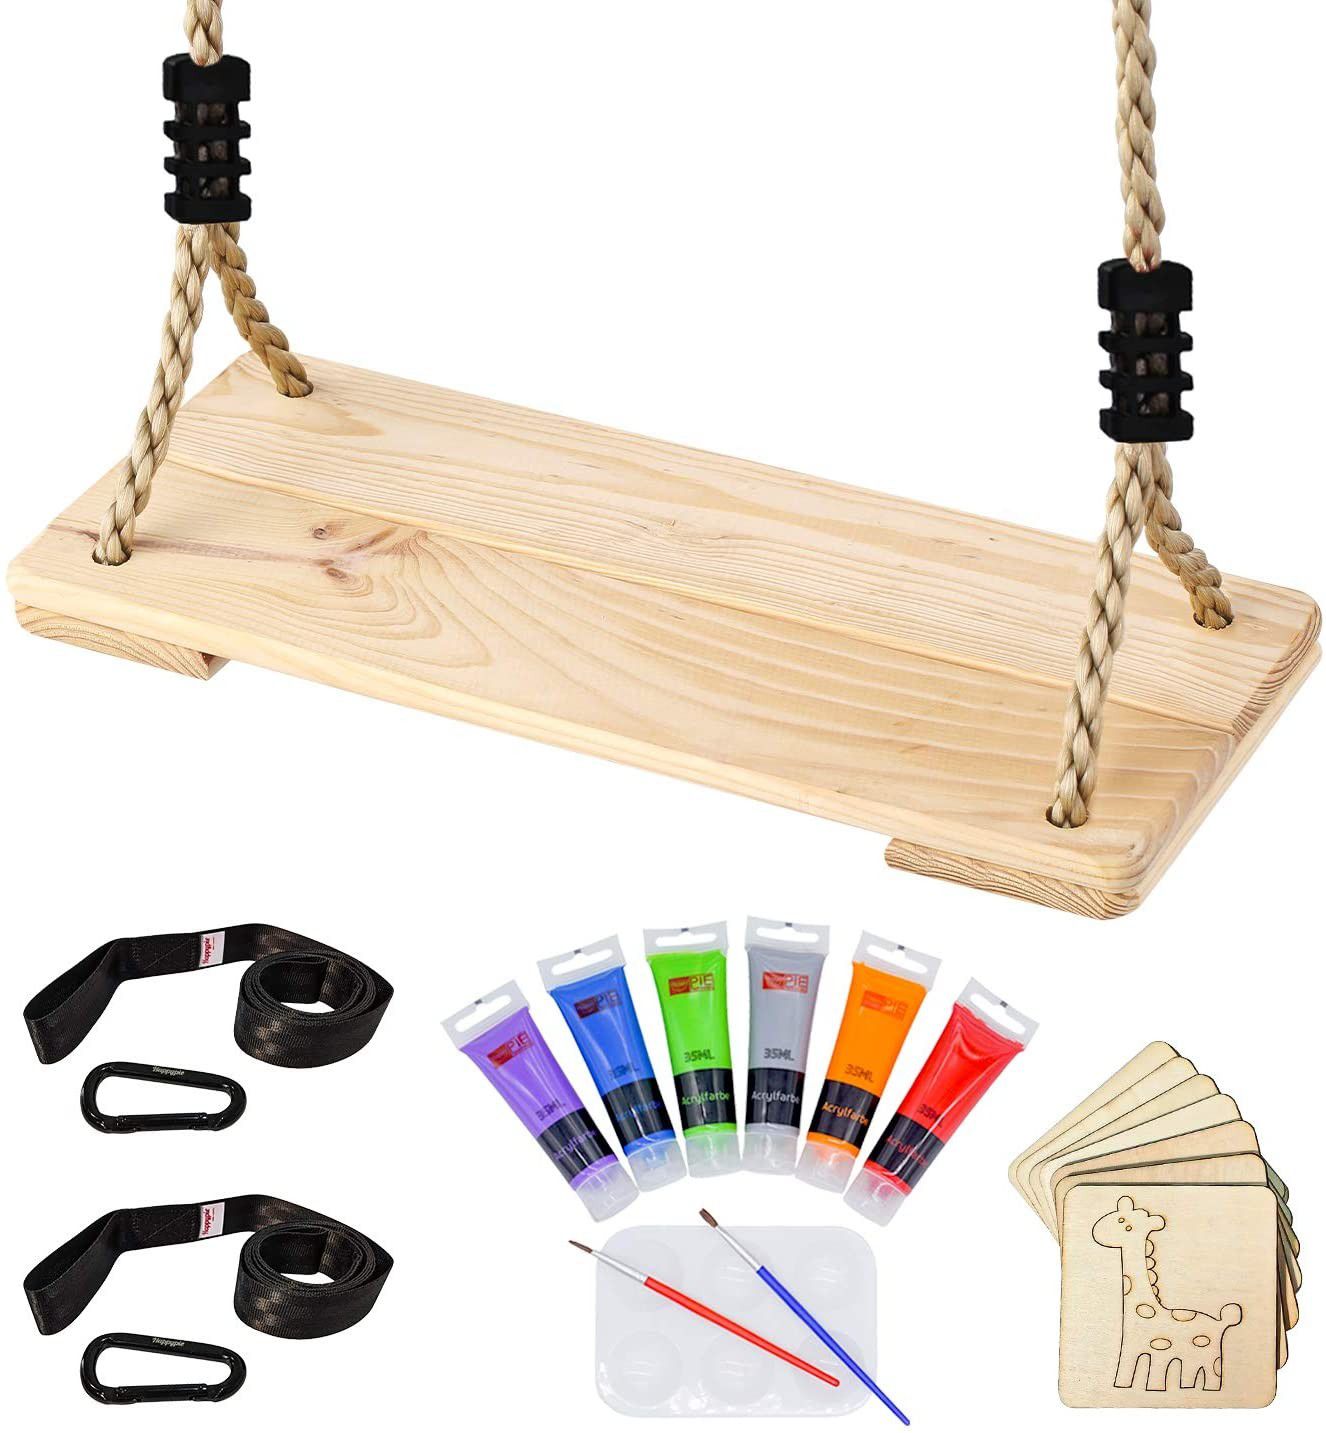 Kids Wooden Tree Swing Set with Painting Accessories, Outdoor Swings Seat